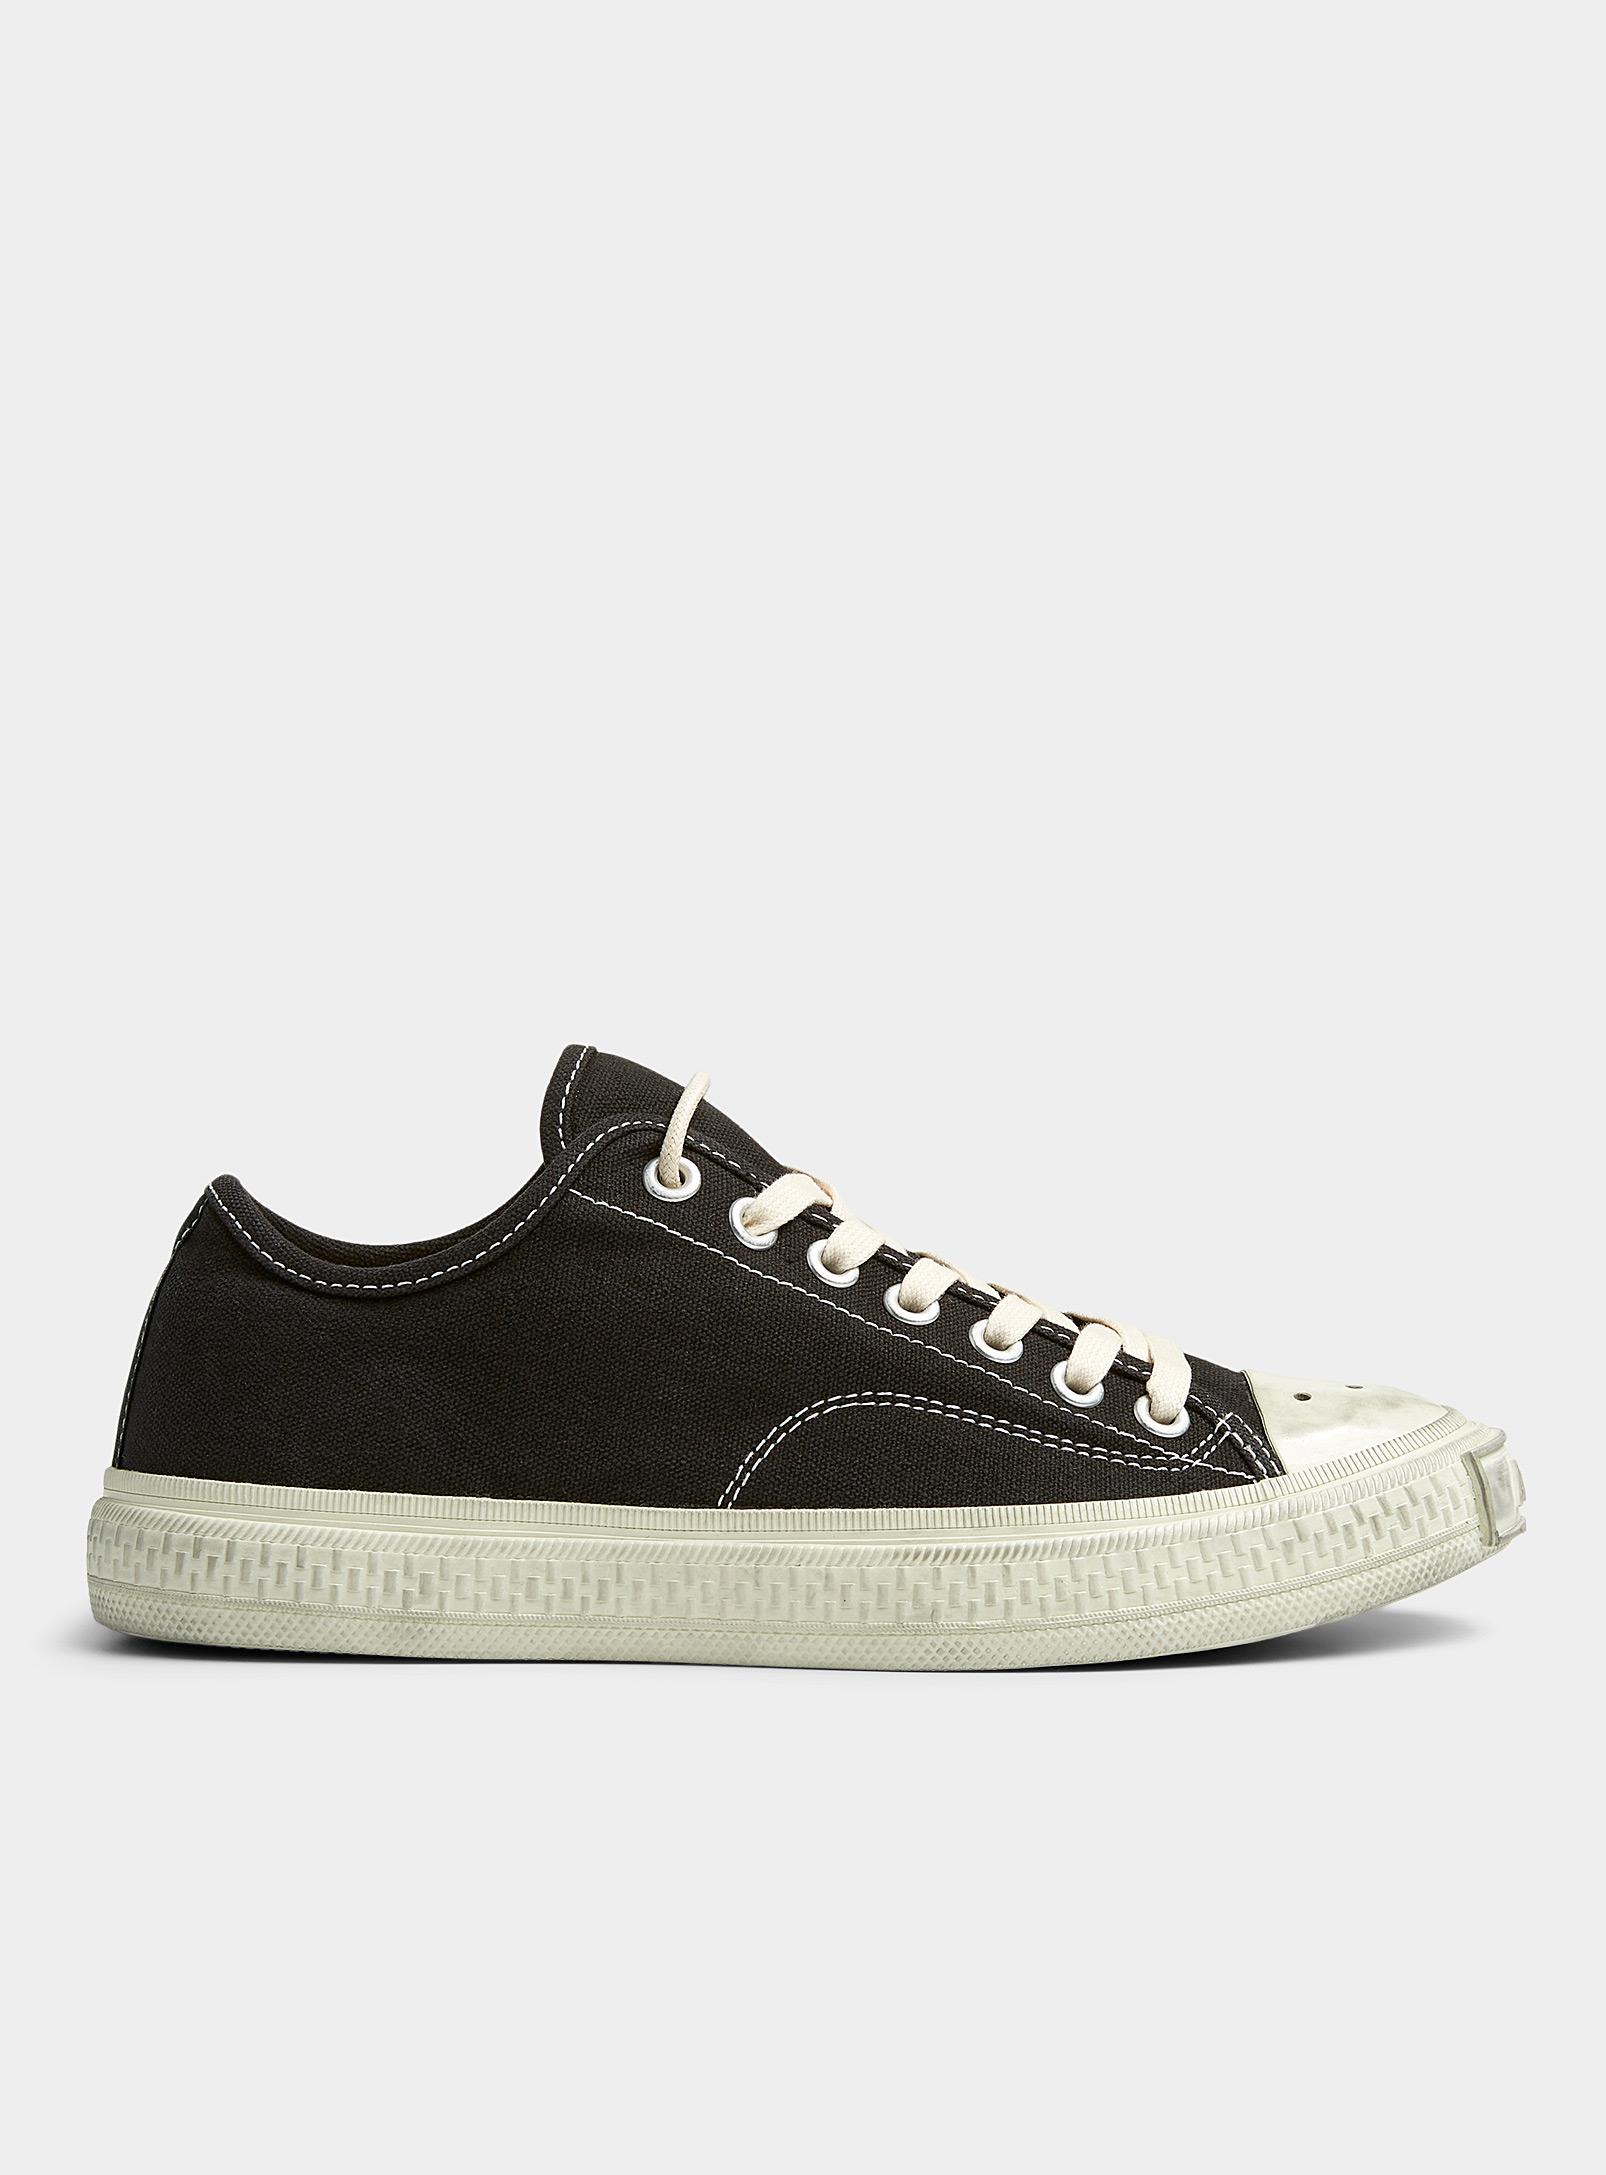 Acne Studios Ballow Sneakers Women In Black And White